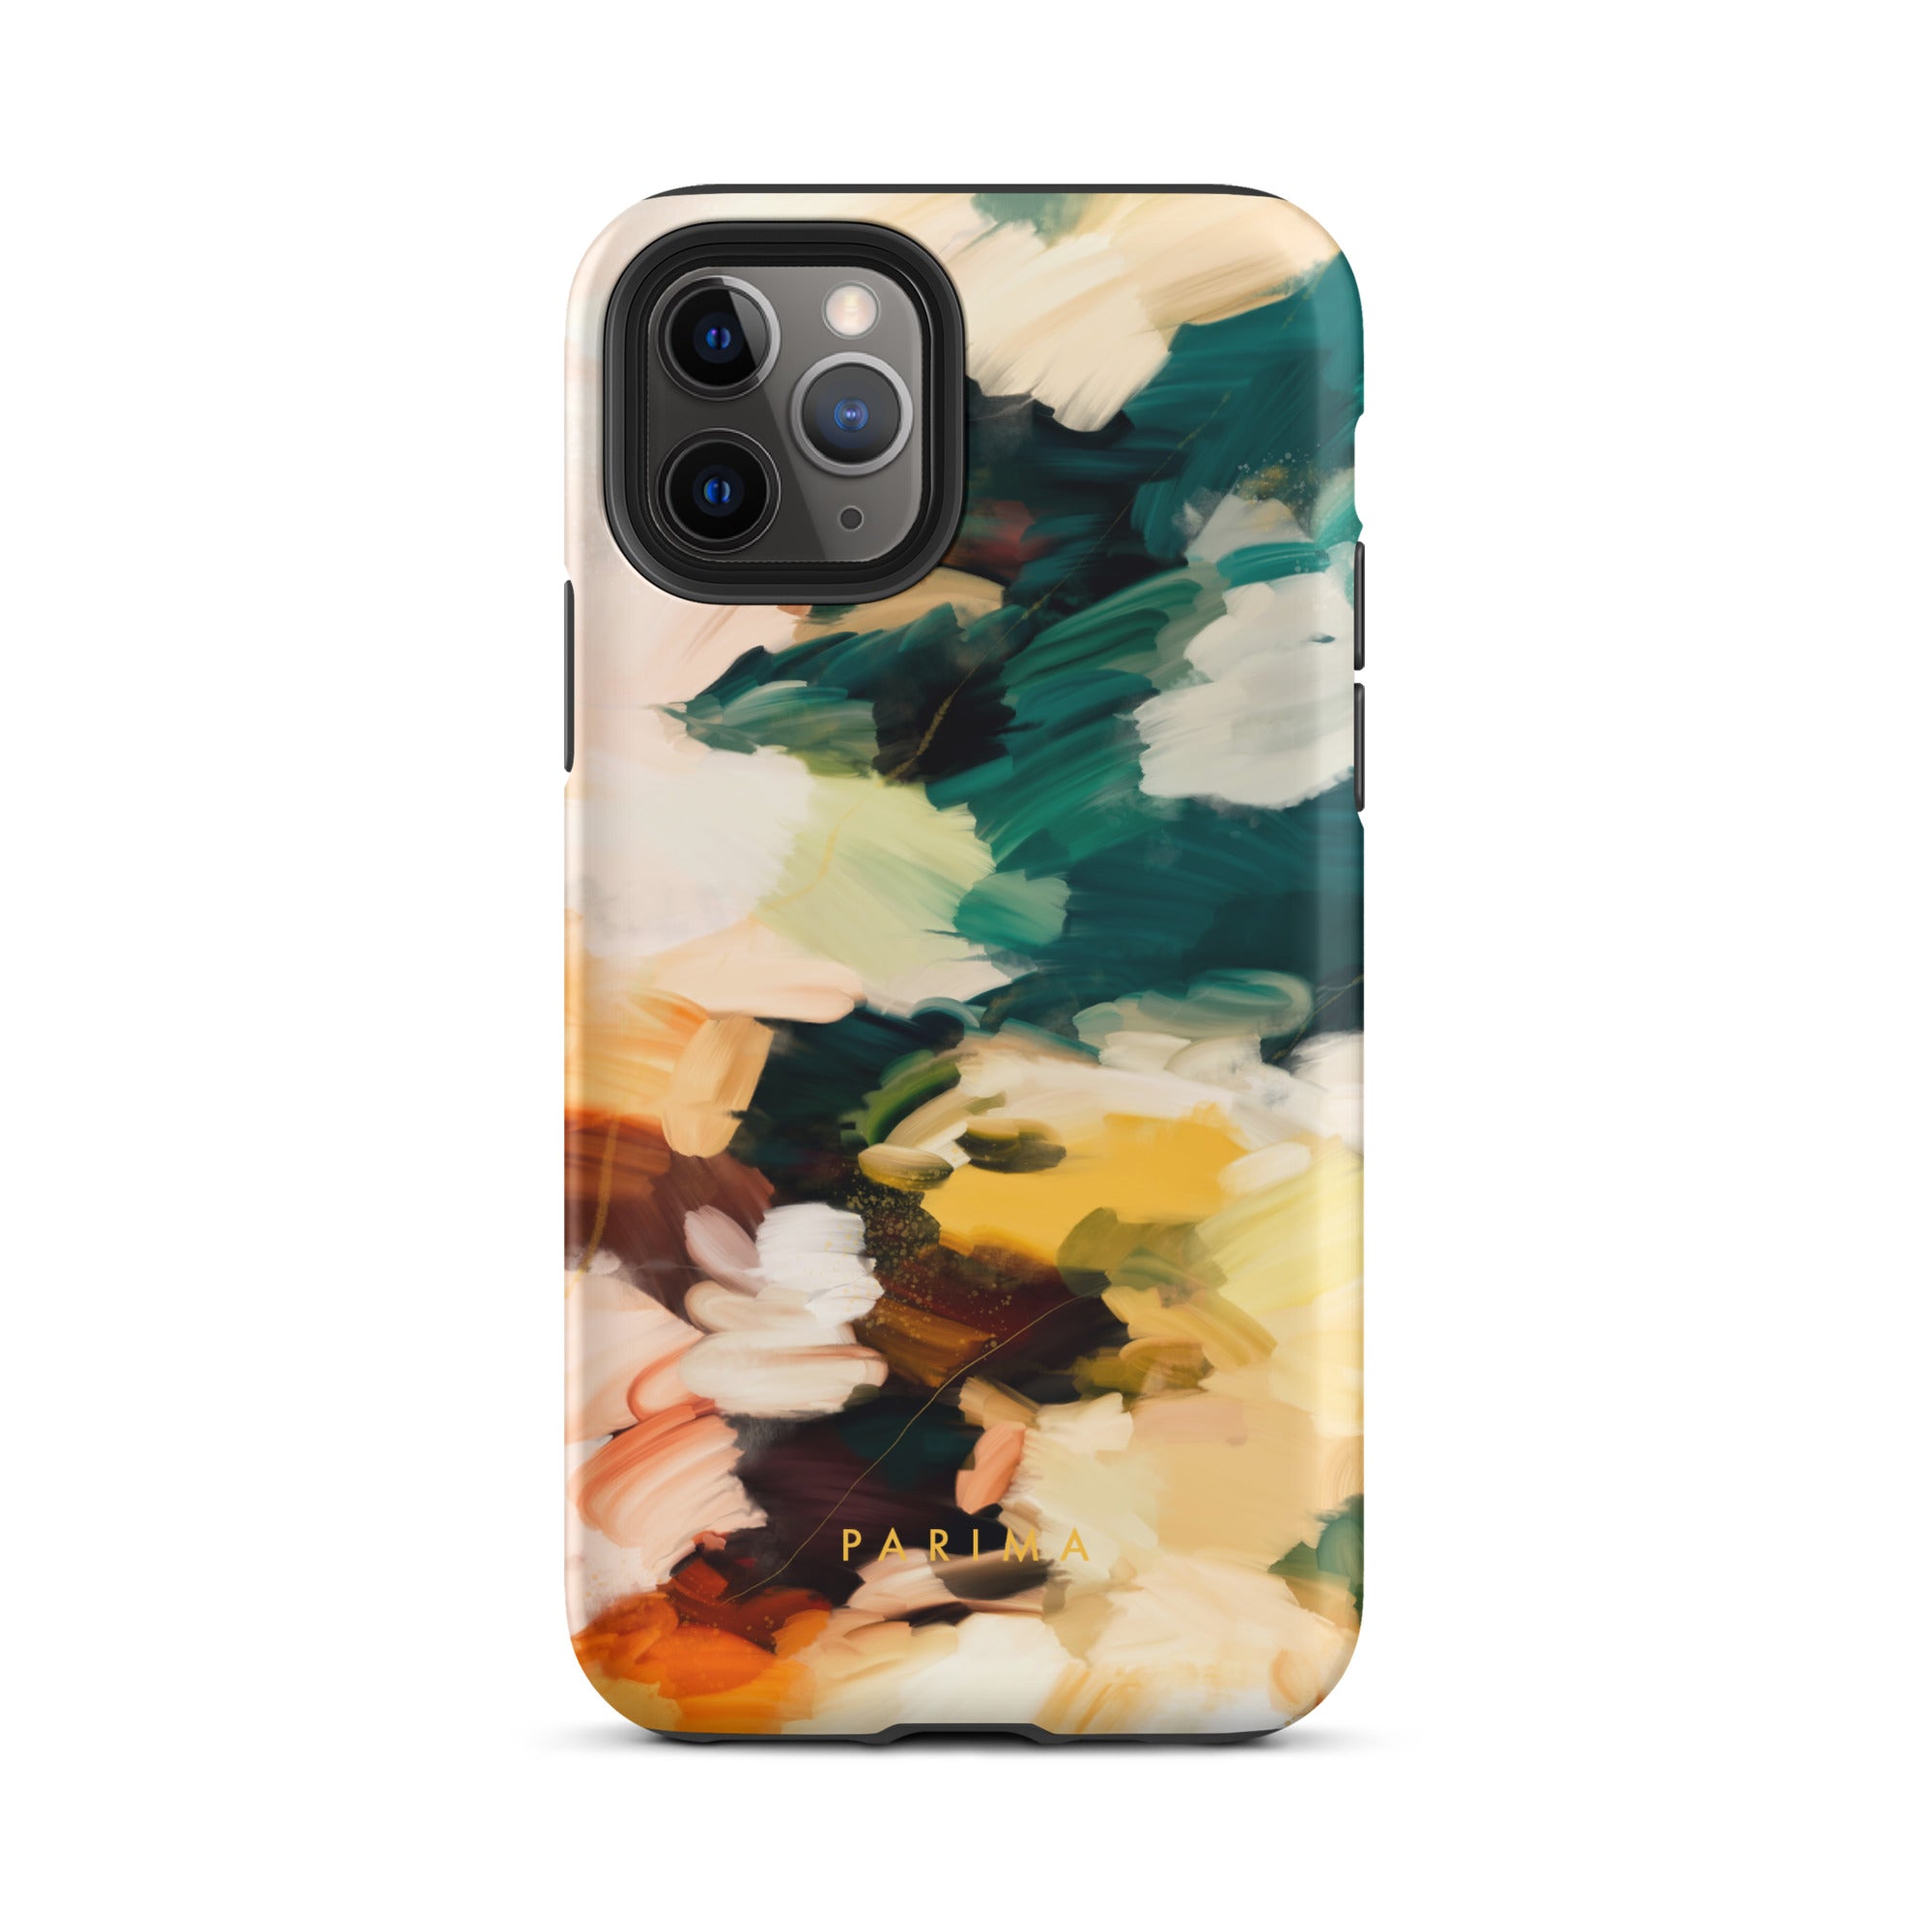 Cinque Terre, green and yellow abstract art - iPhone 11 Pro tough case by Parima Studio